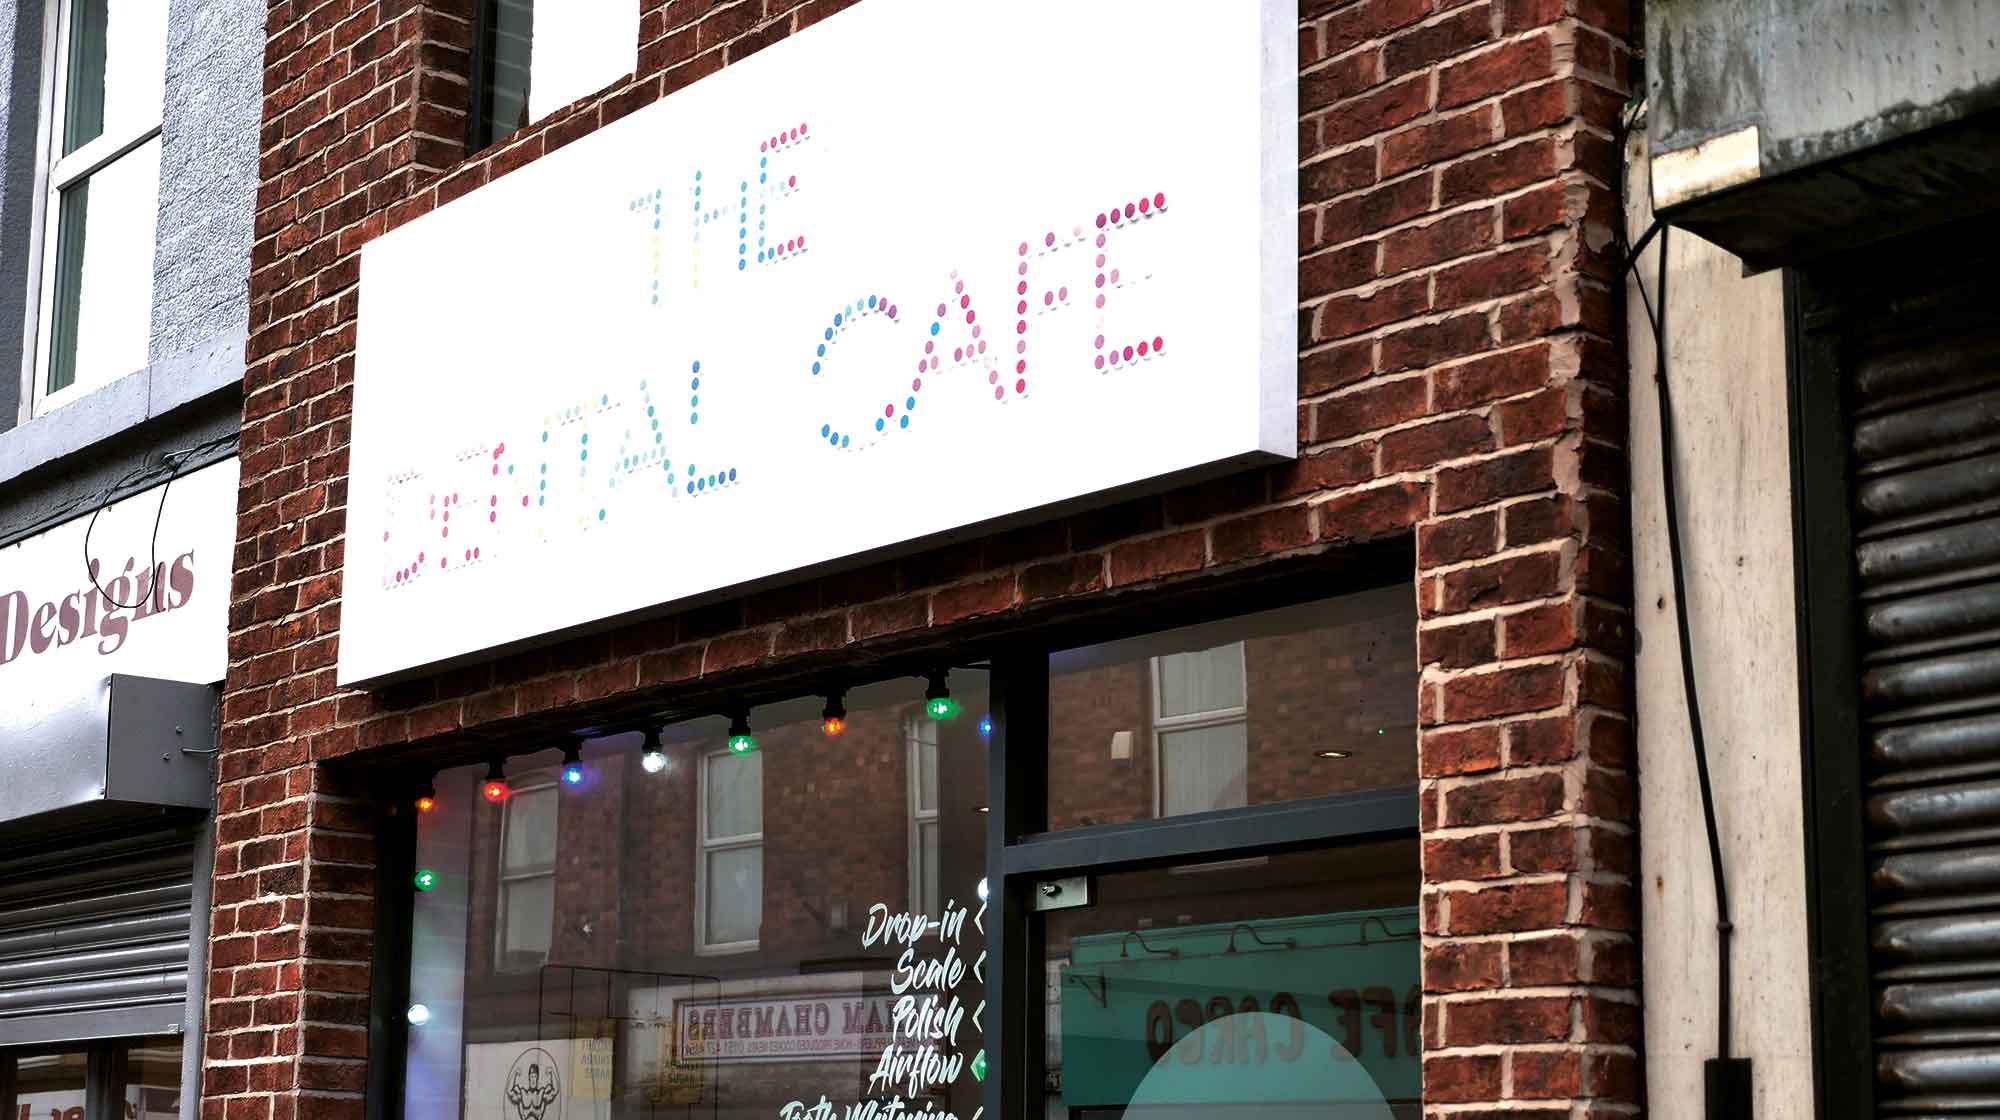 The Dental Cafe in Liverpool